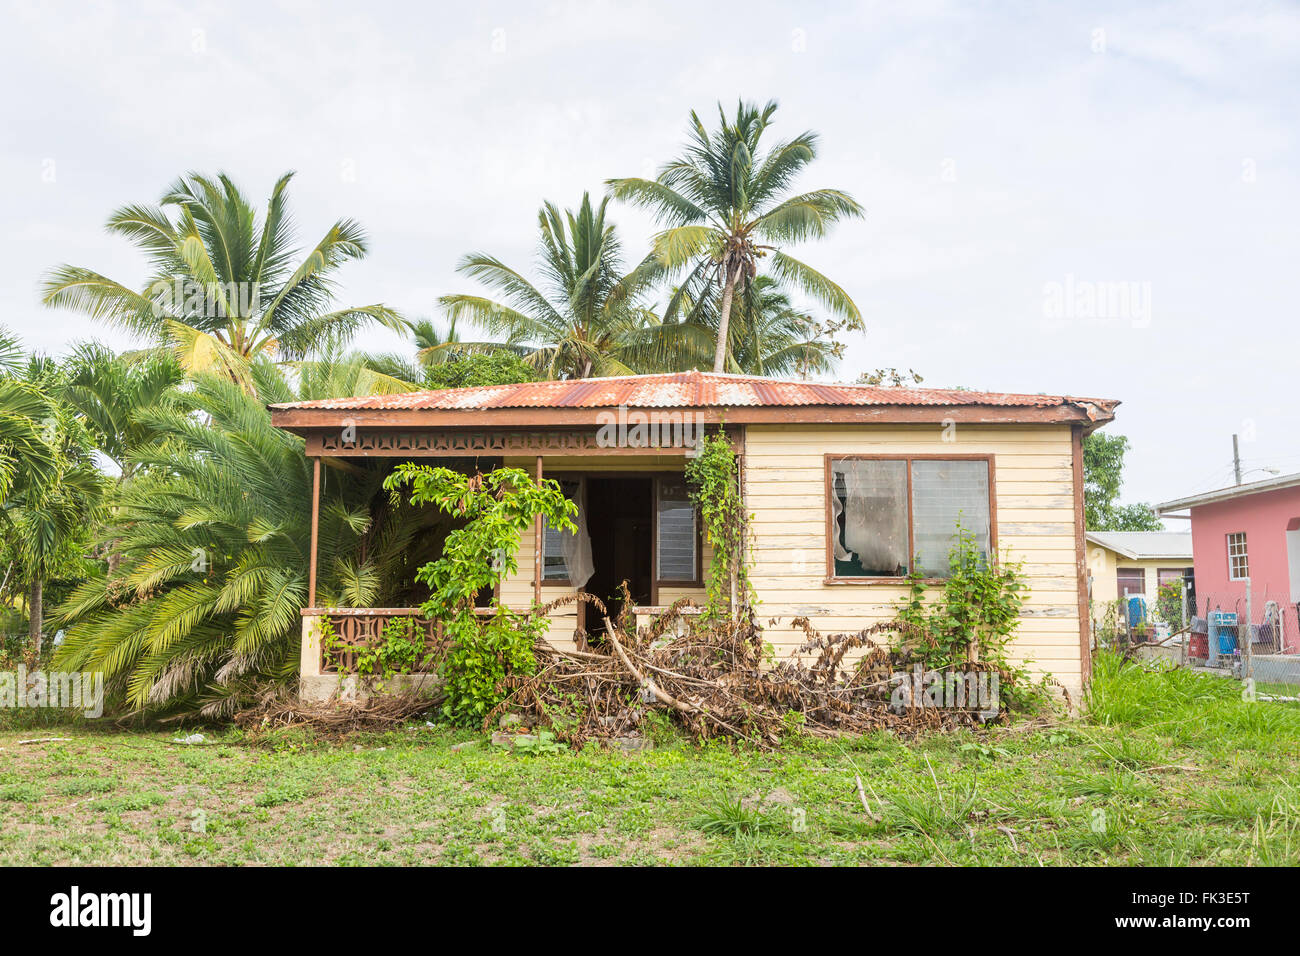 Typical run-down, dilapidated wooden single storey house in Liberta, south Antigua, Antigua and Barbuda, West Indies Stock Photo